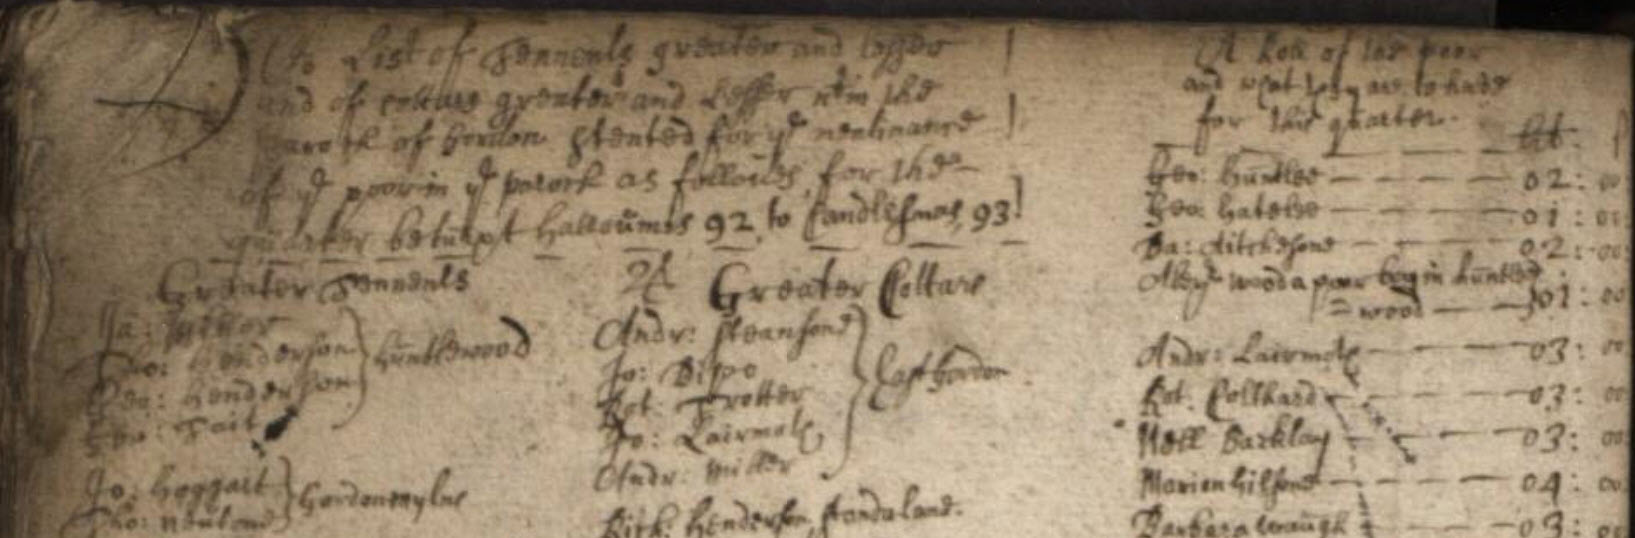 Picture Extract from Stent Roll 1692/93 showing tenants of Gordon.  Reproduced courtesy of National Records of Scotland: Scotland’s People, Gordon kirk session, Minutes (1682-1708) CH2/457/1.